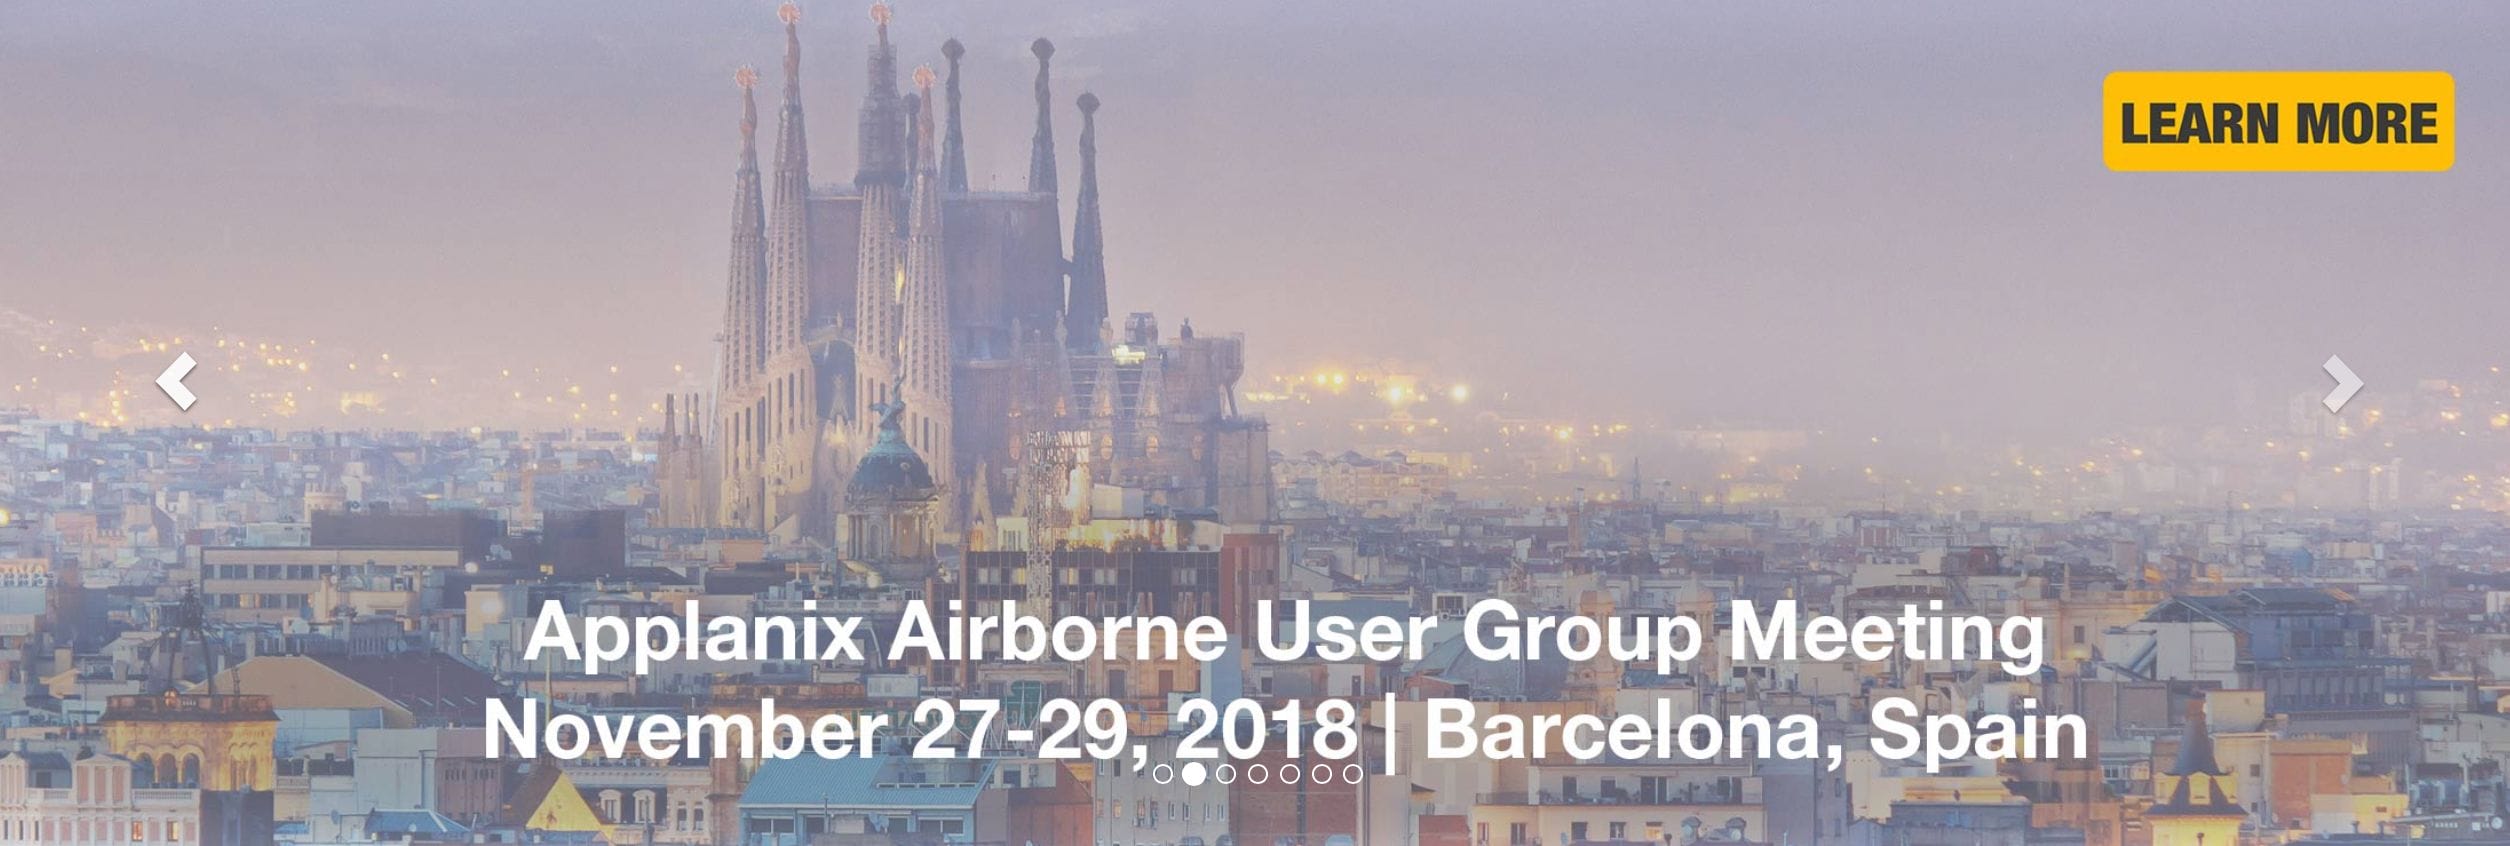 Barcelona the Site for Applanix Airborne User Group Event